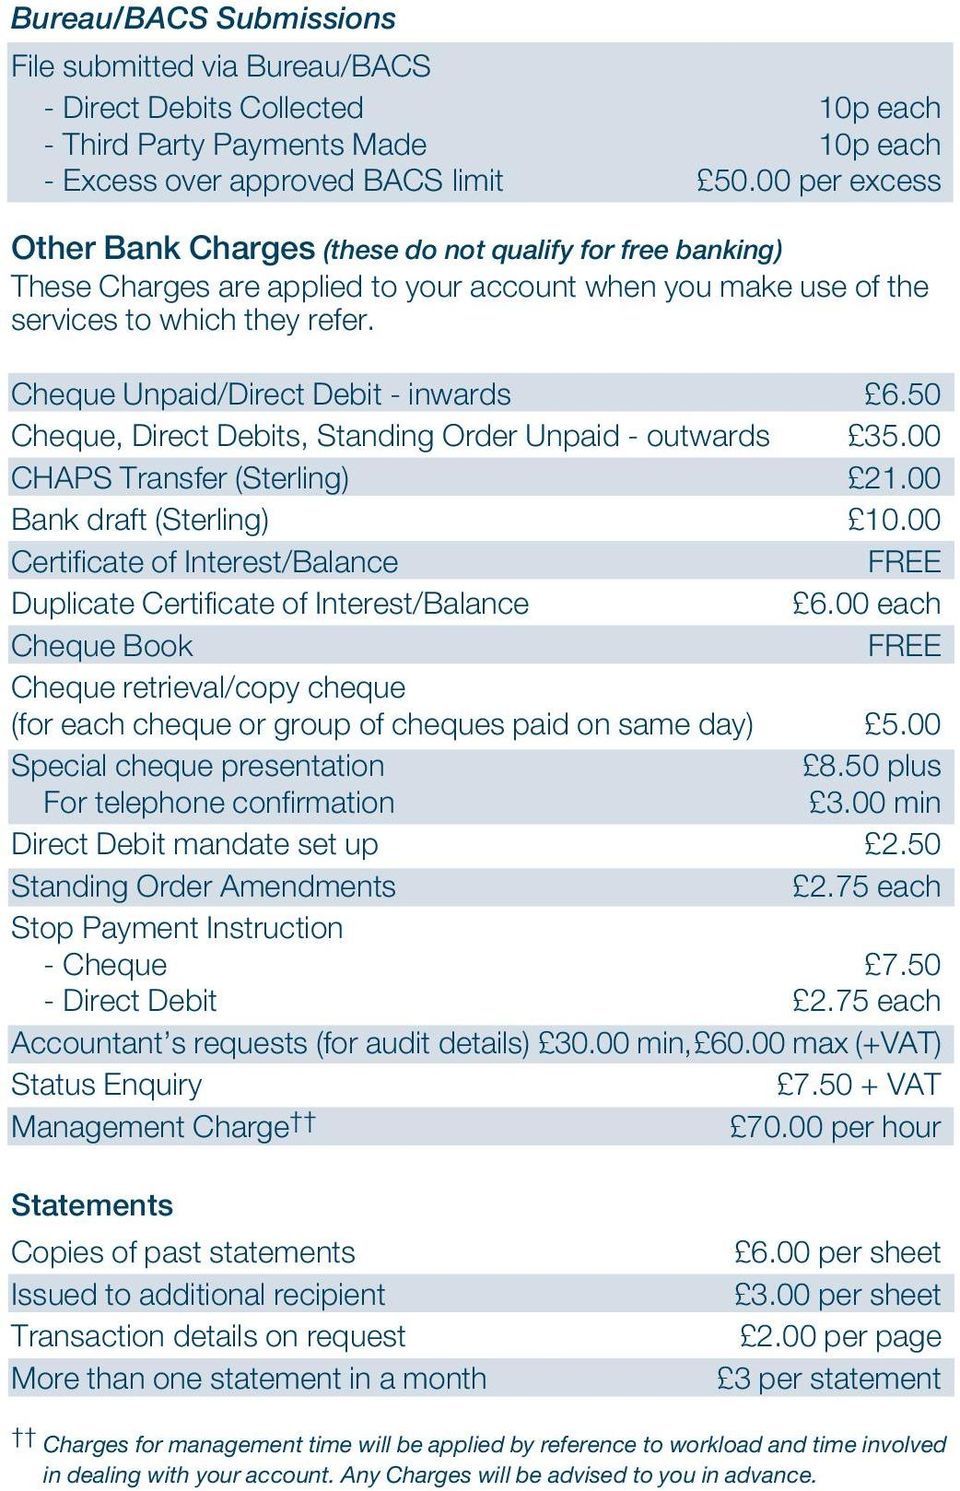 Cheque Unpaid/Direct Debit - inwards 6.50 Cheque, Direct Debits, Standing Order Unpaid - outwards 35.00 CHAPS Transfer (Sterling) 21.00 Bank draft (Sterling) 10.